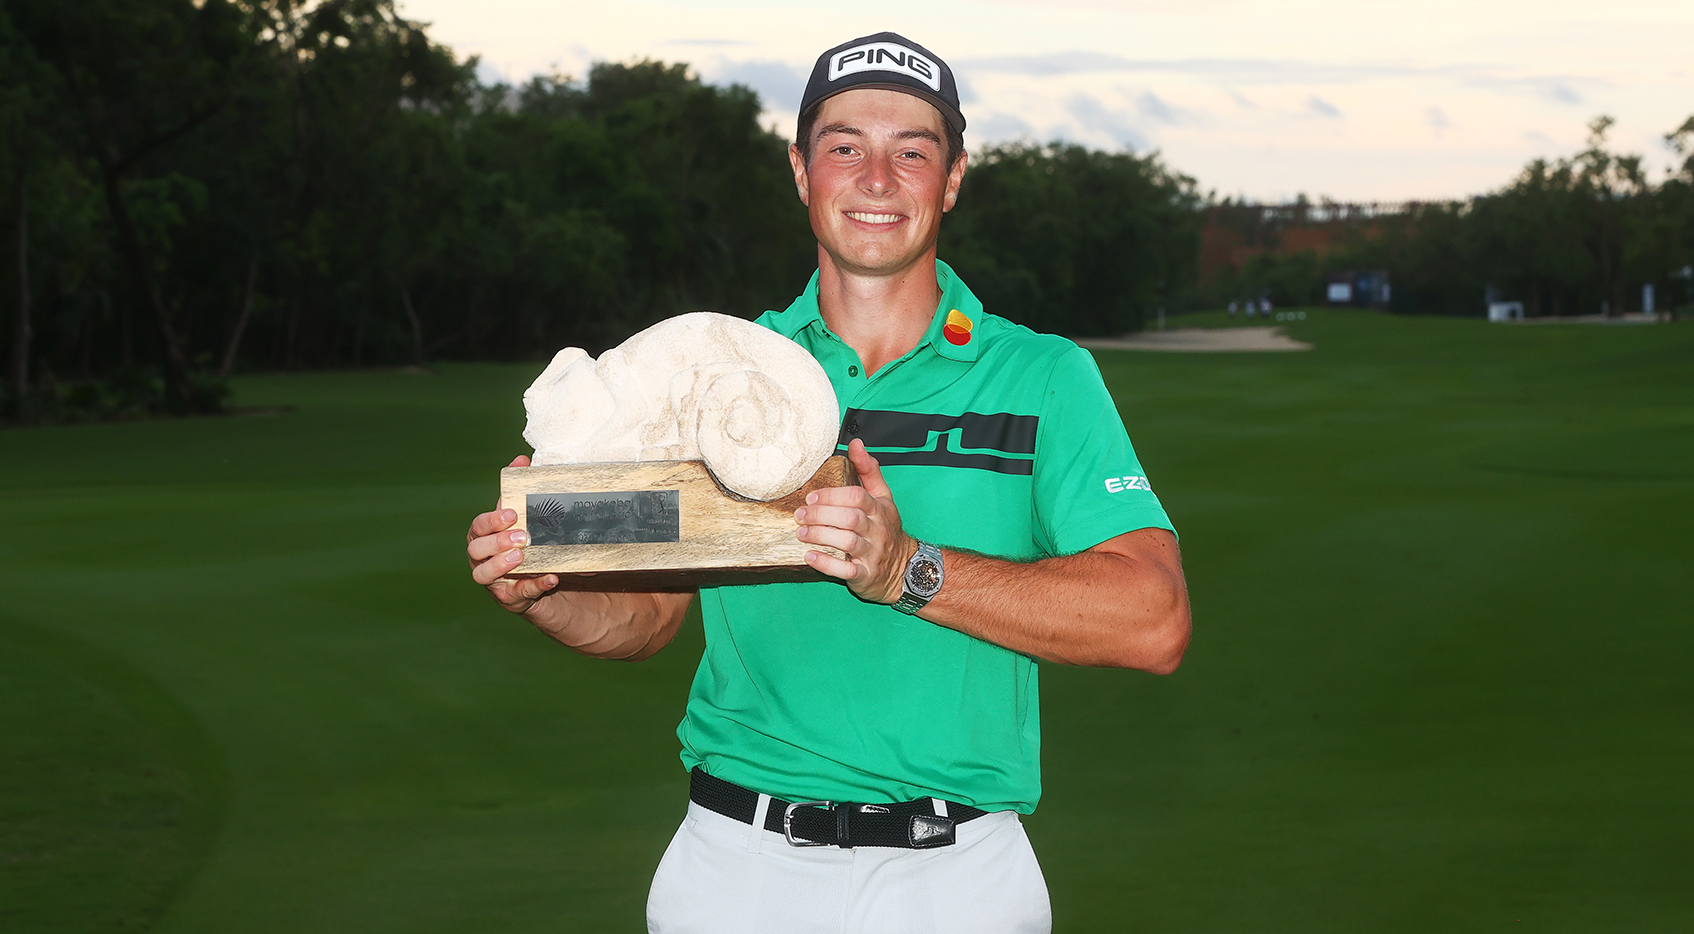 Viktor Hovland’s ‘easygoing’ personality pays off at Mayakoba Golf Classic presented by UNIFIN